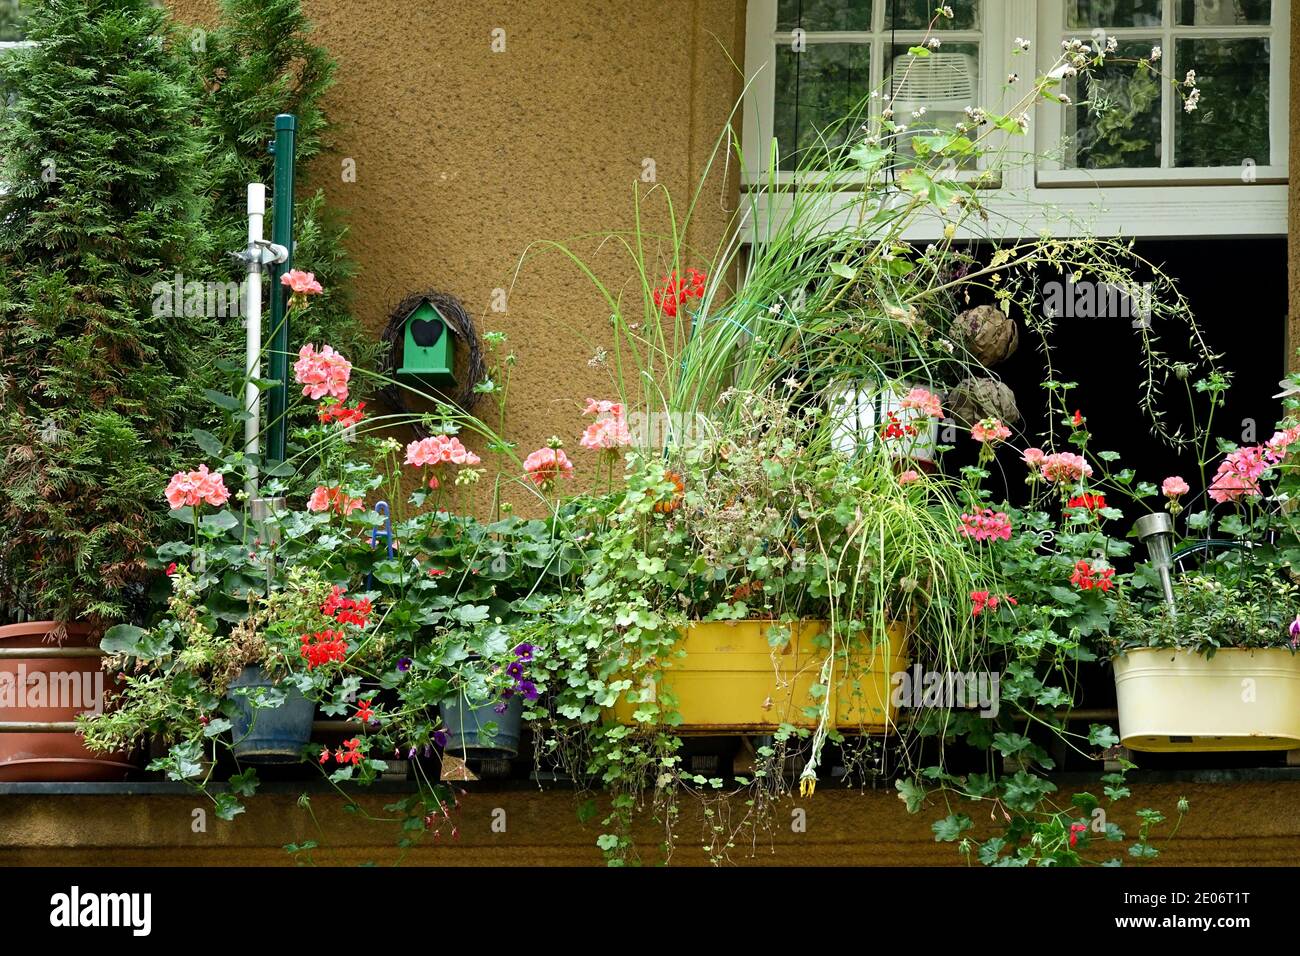 Plants Balcony garden Balcony Pots Plants Growing In pots, Containers Flowers Gardening Plants balcony Container Germany Berlin Stock Photo